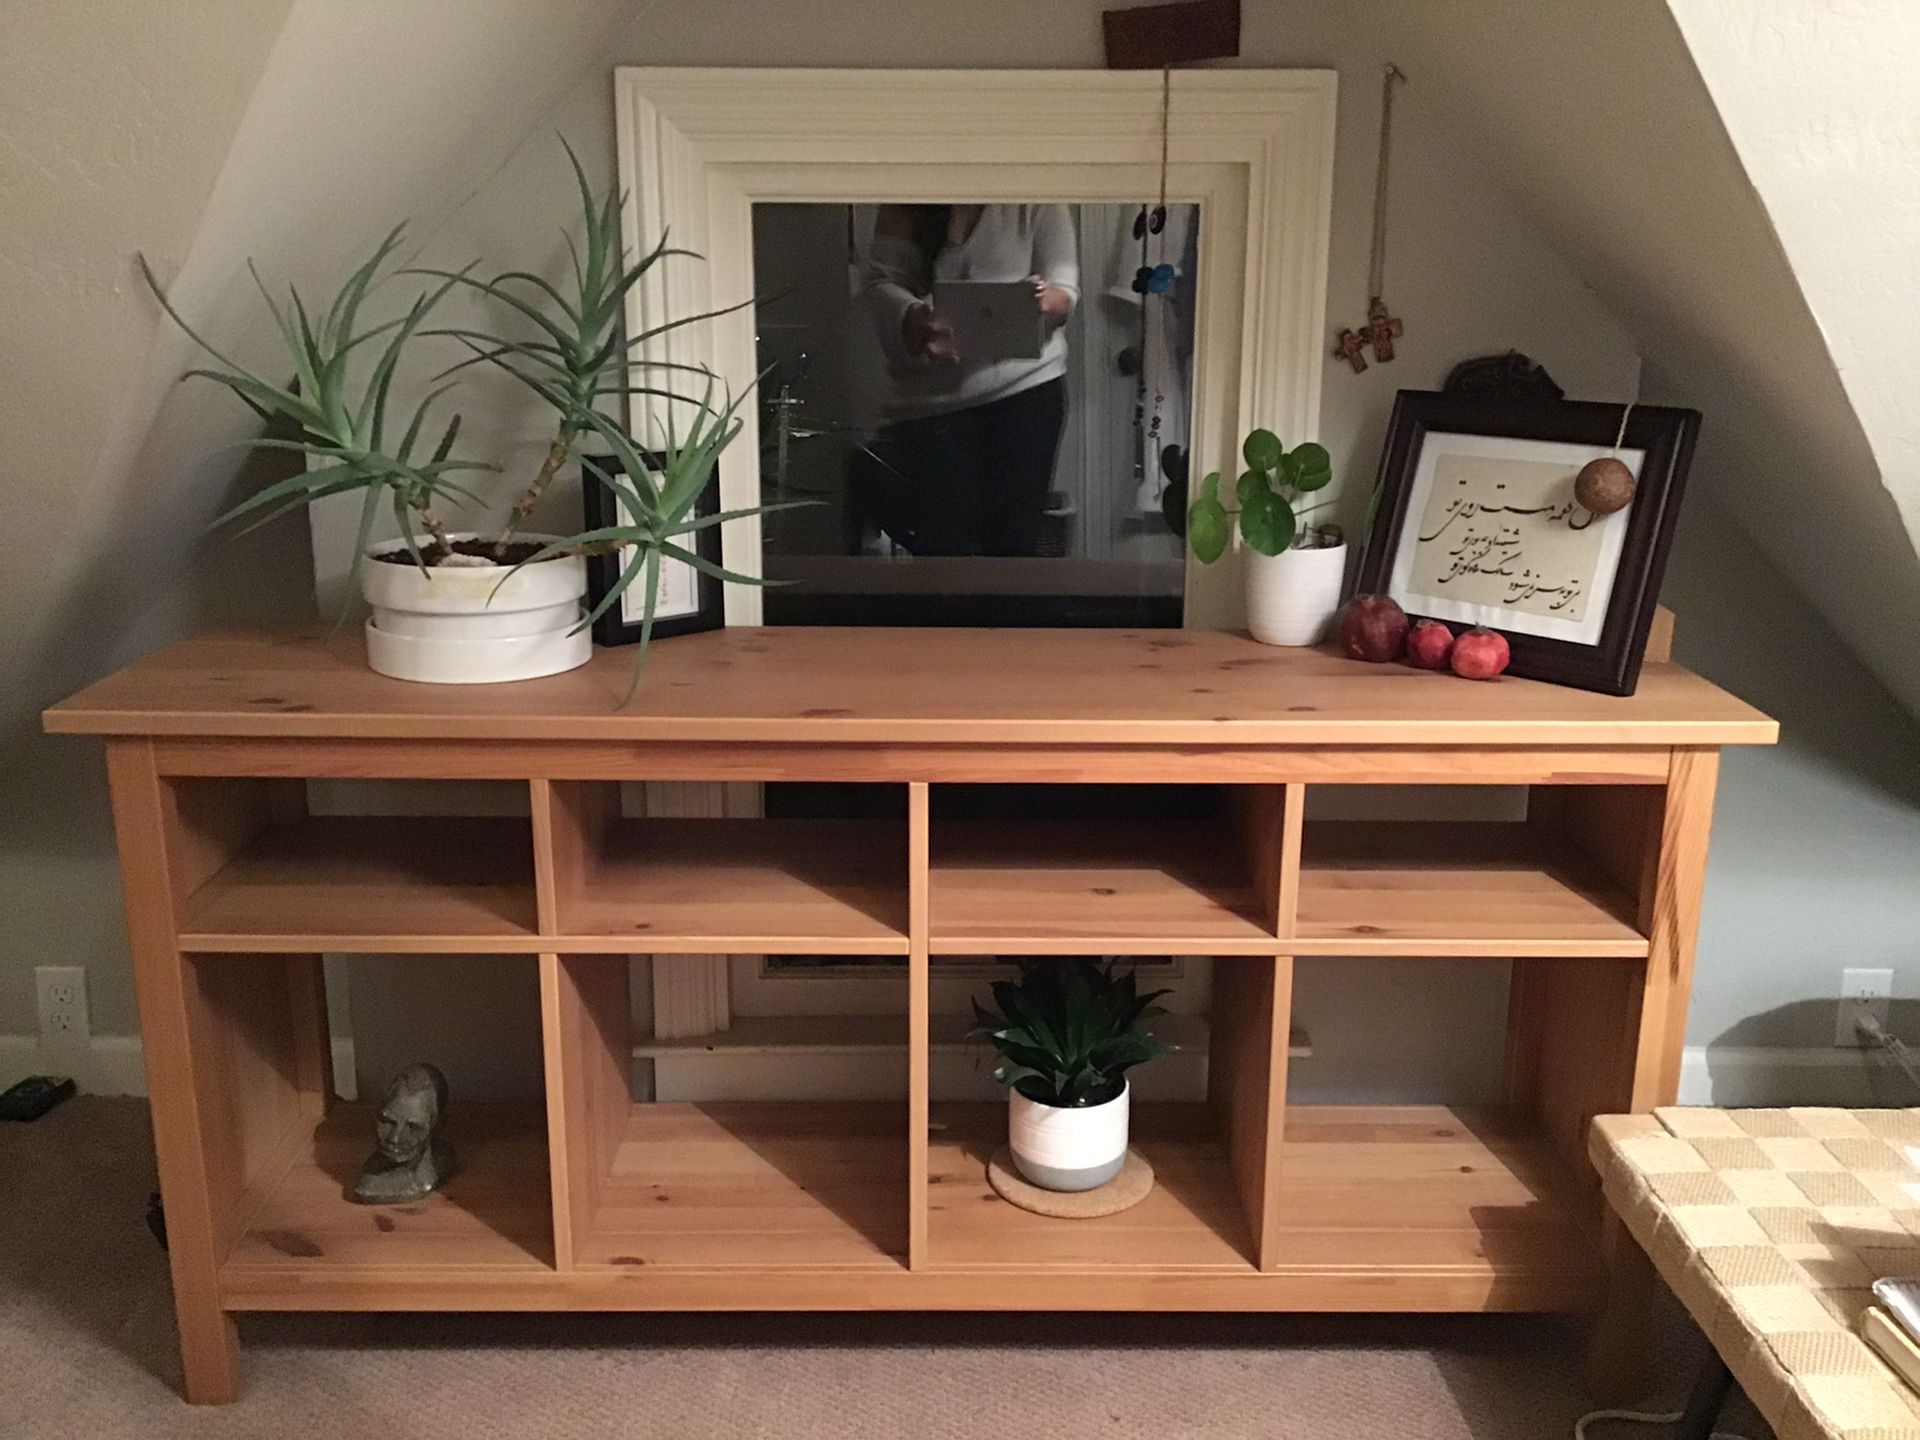 IKEA HEMNES console table - solid wood